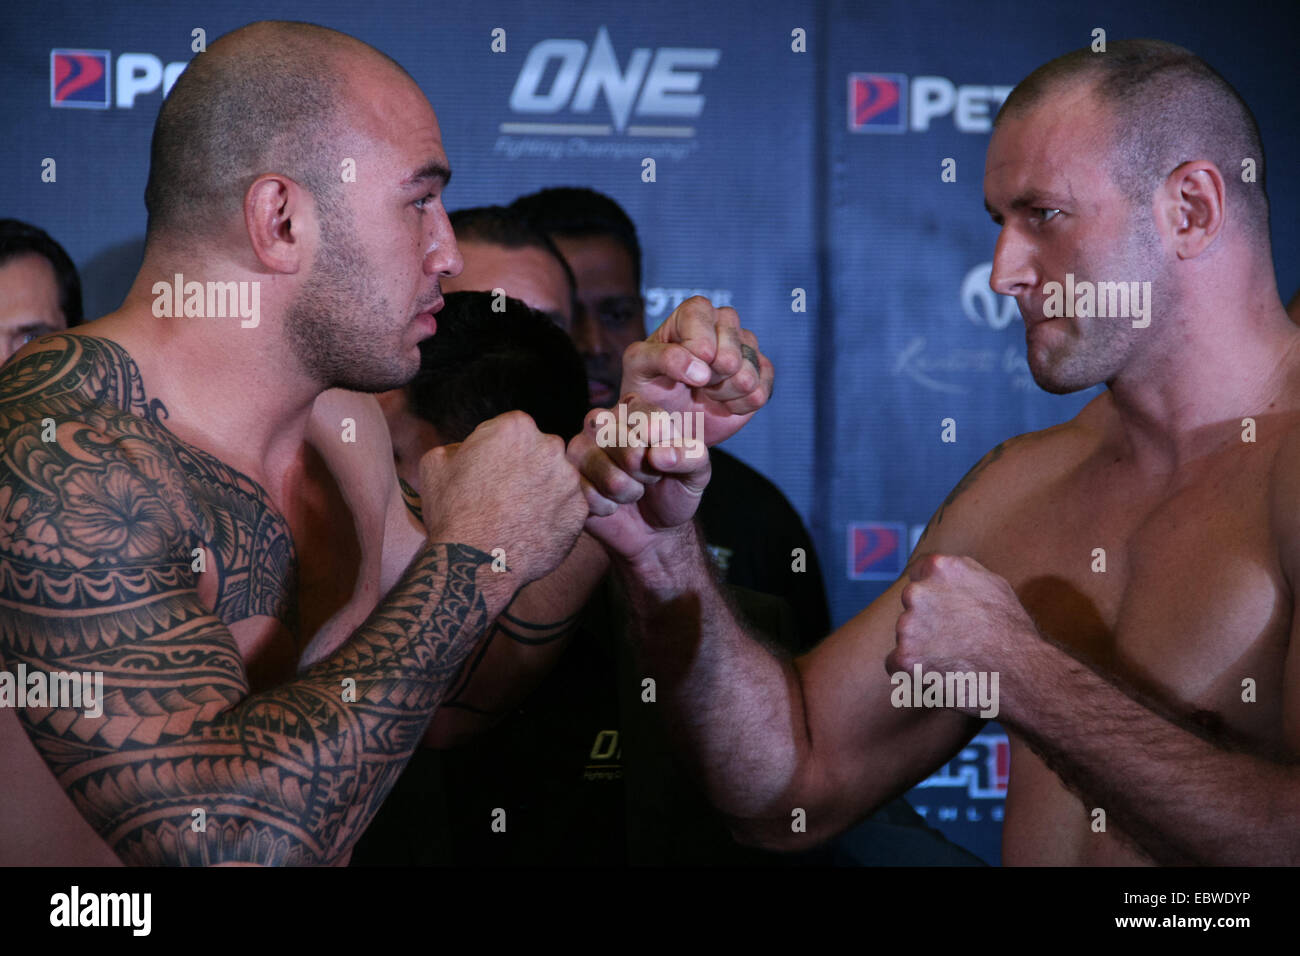 Brandon Vera (L) of the Philippines and Igor Subora (R) of Ukraine face off during the OneFC weigh-in at the Mall of Asia Atrium in Pasay city. One Fighting Championship CEO Victor Cui lead the official weigh-in of One FC: Warrior's Way at the Atrium of the Mall of Asia in Pasay city. Main event is between ONE FC Bantamweight World Champion, Bibiano Fernandes, and Dae Hwan Kim of Korea. © J Gerard Seguia/Pacific Press/Alamy Live News Stock Photo